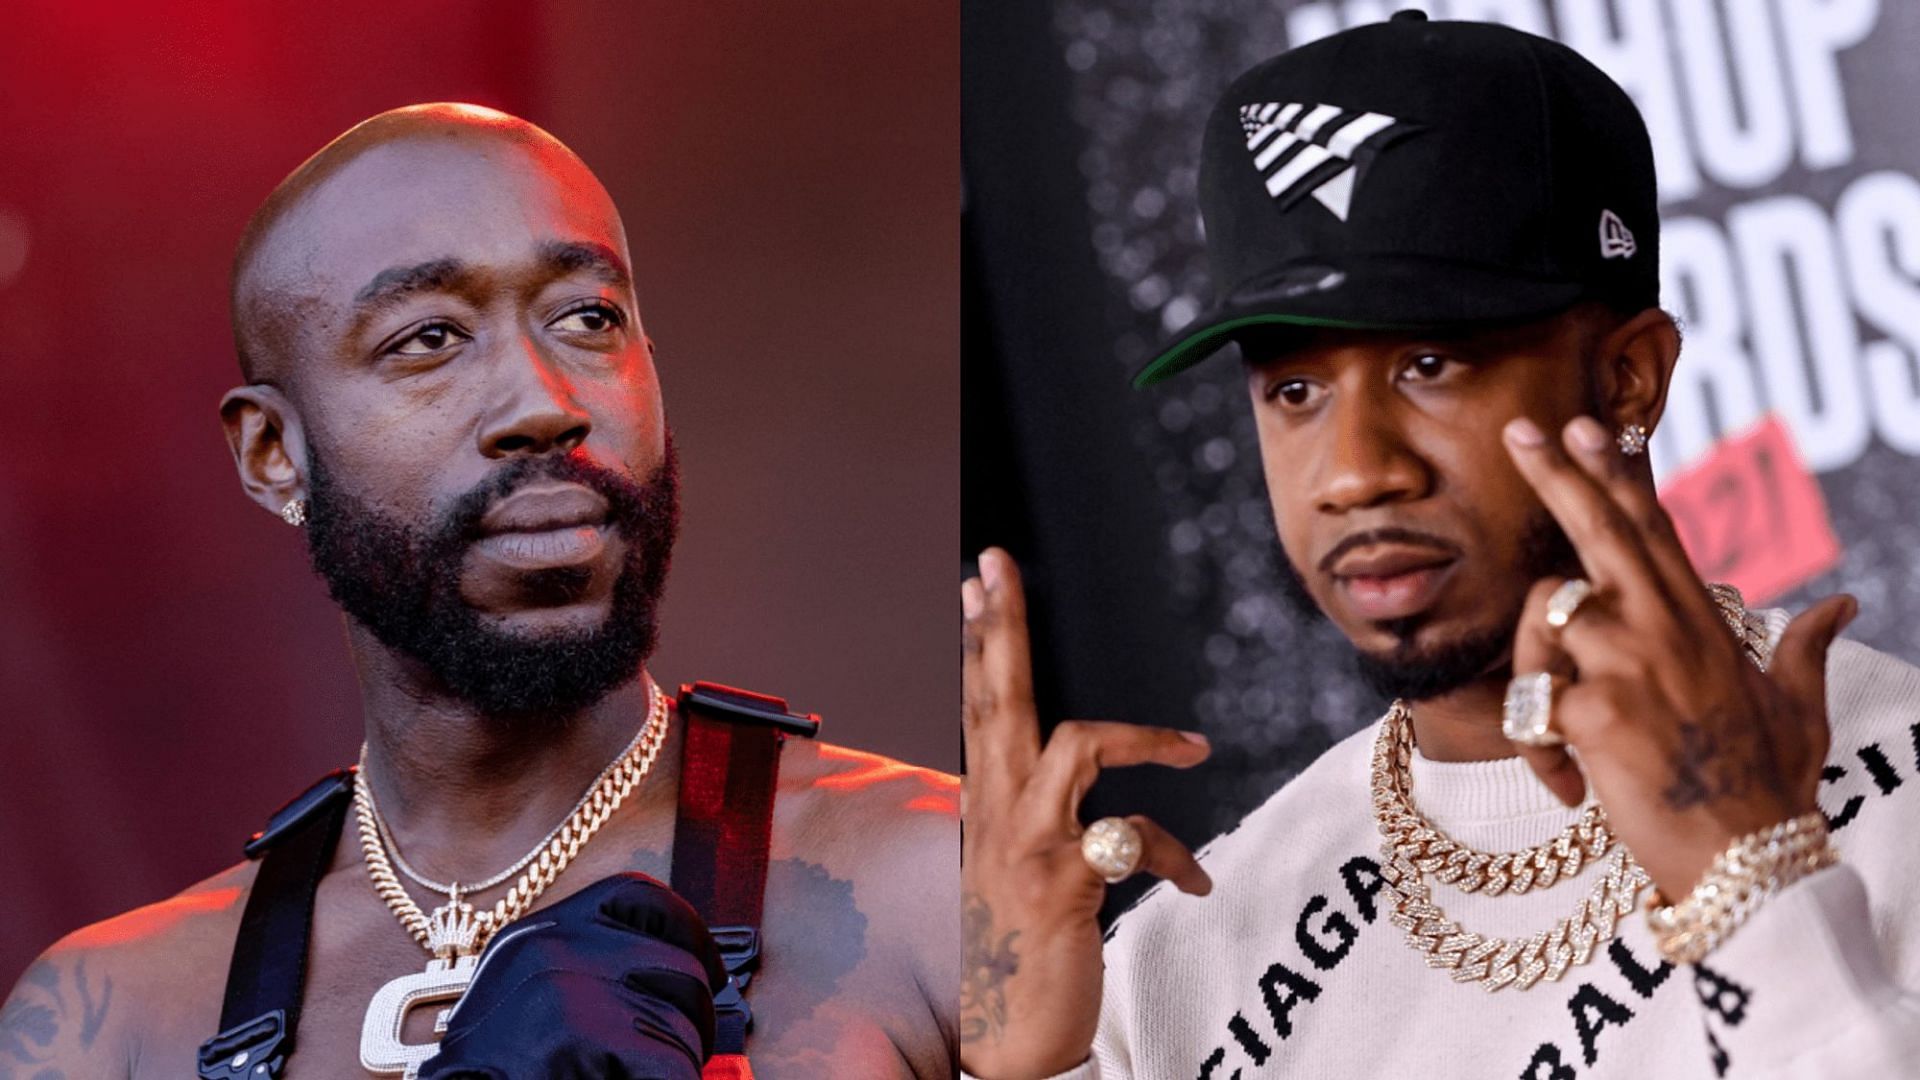 Freddie Gibbs gets assaulted by Benny The Butcher&#039;s associates (Image via Getty Images)